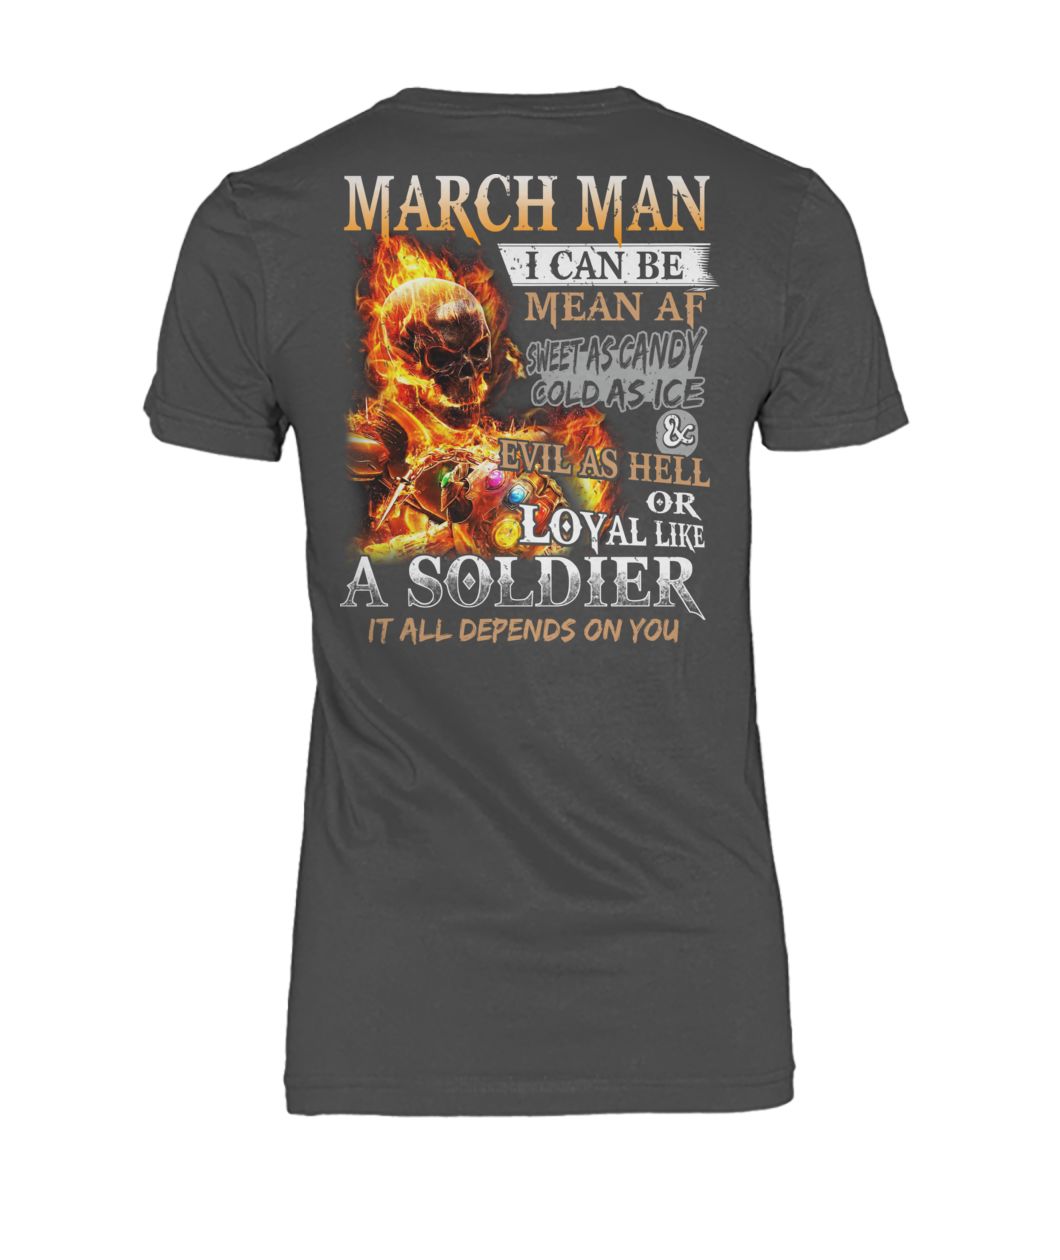 March man I can be mean af sweet as candy gold as ice and evil as hell women's crew tee